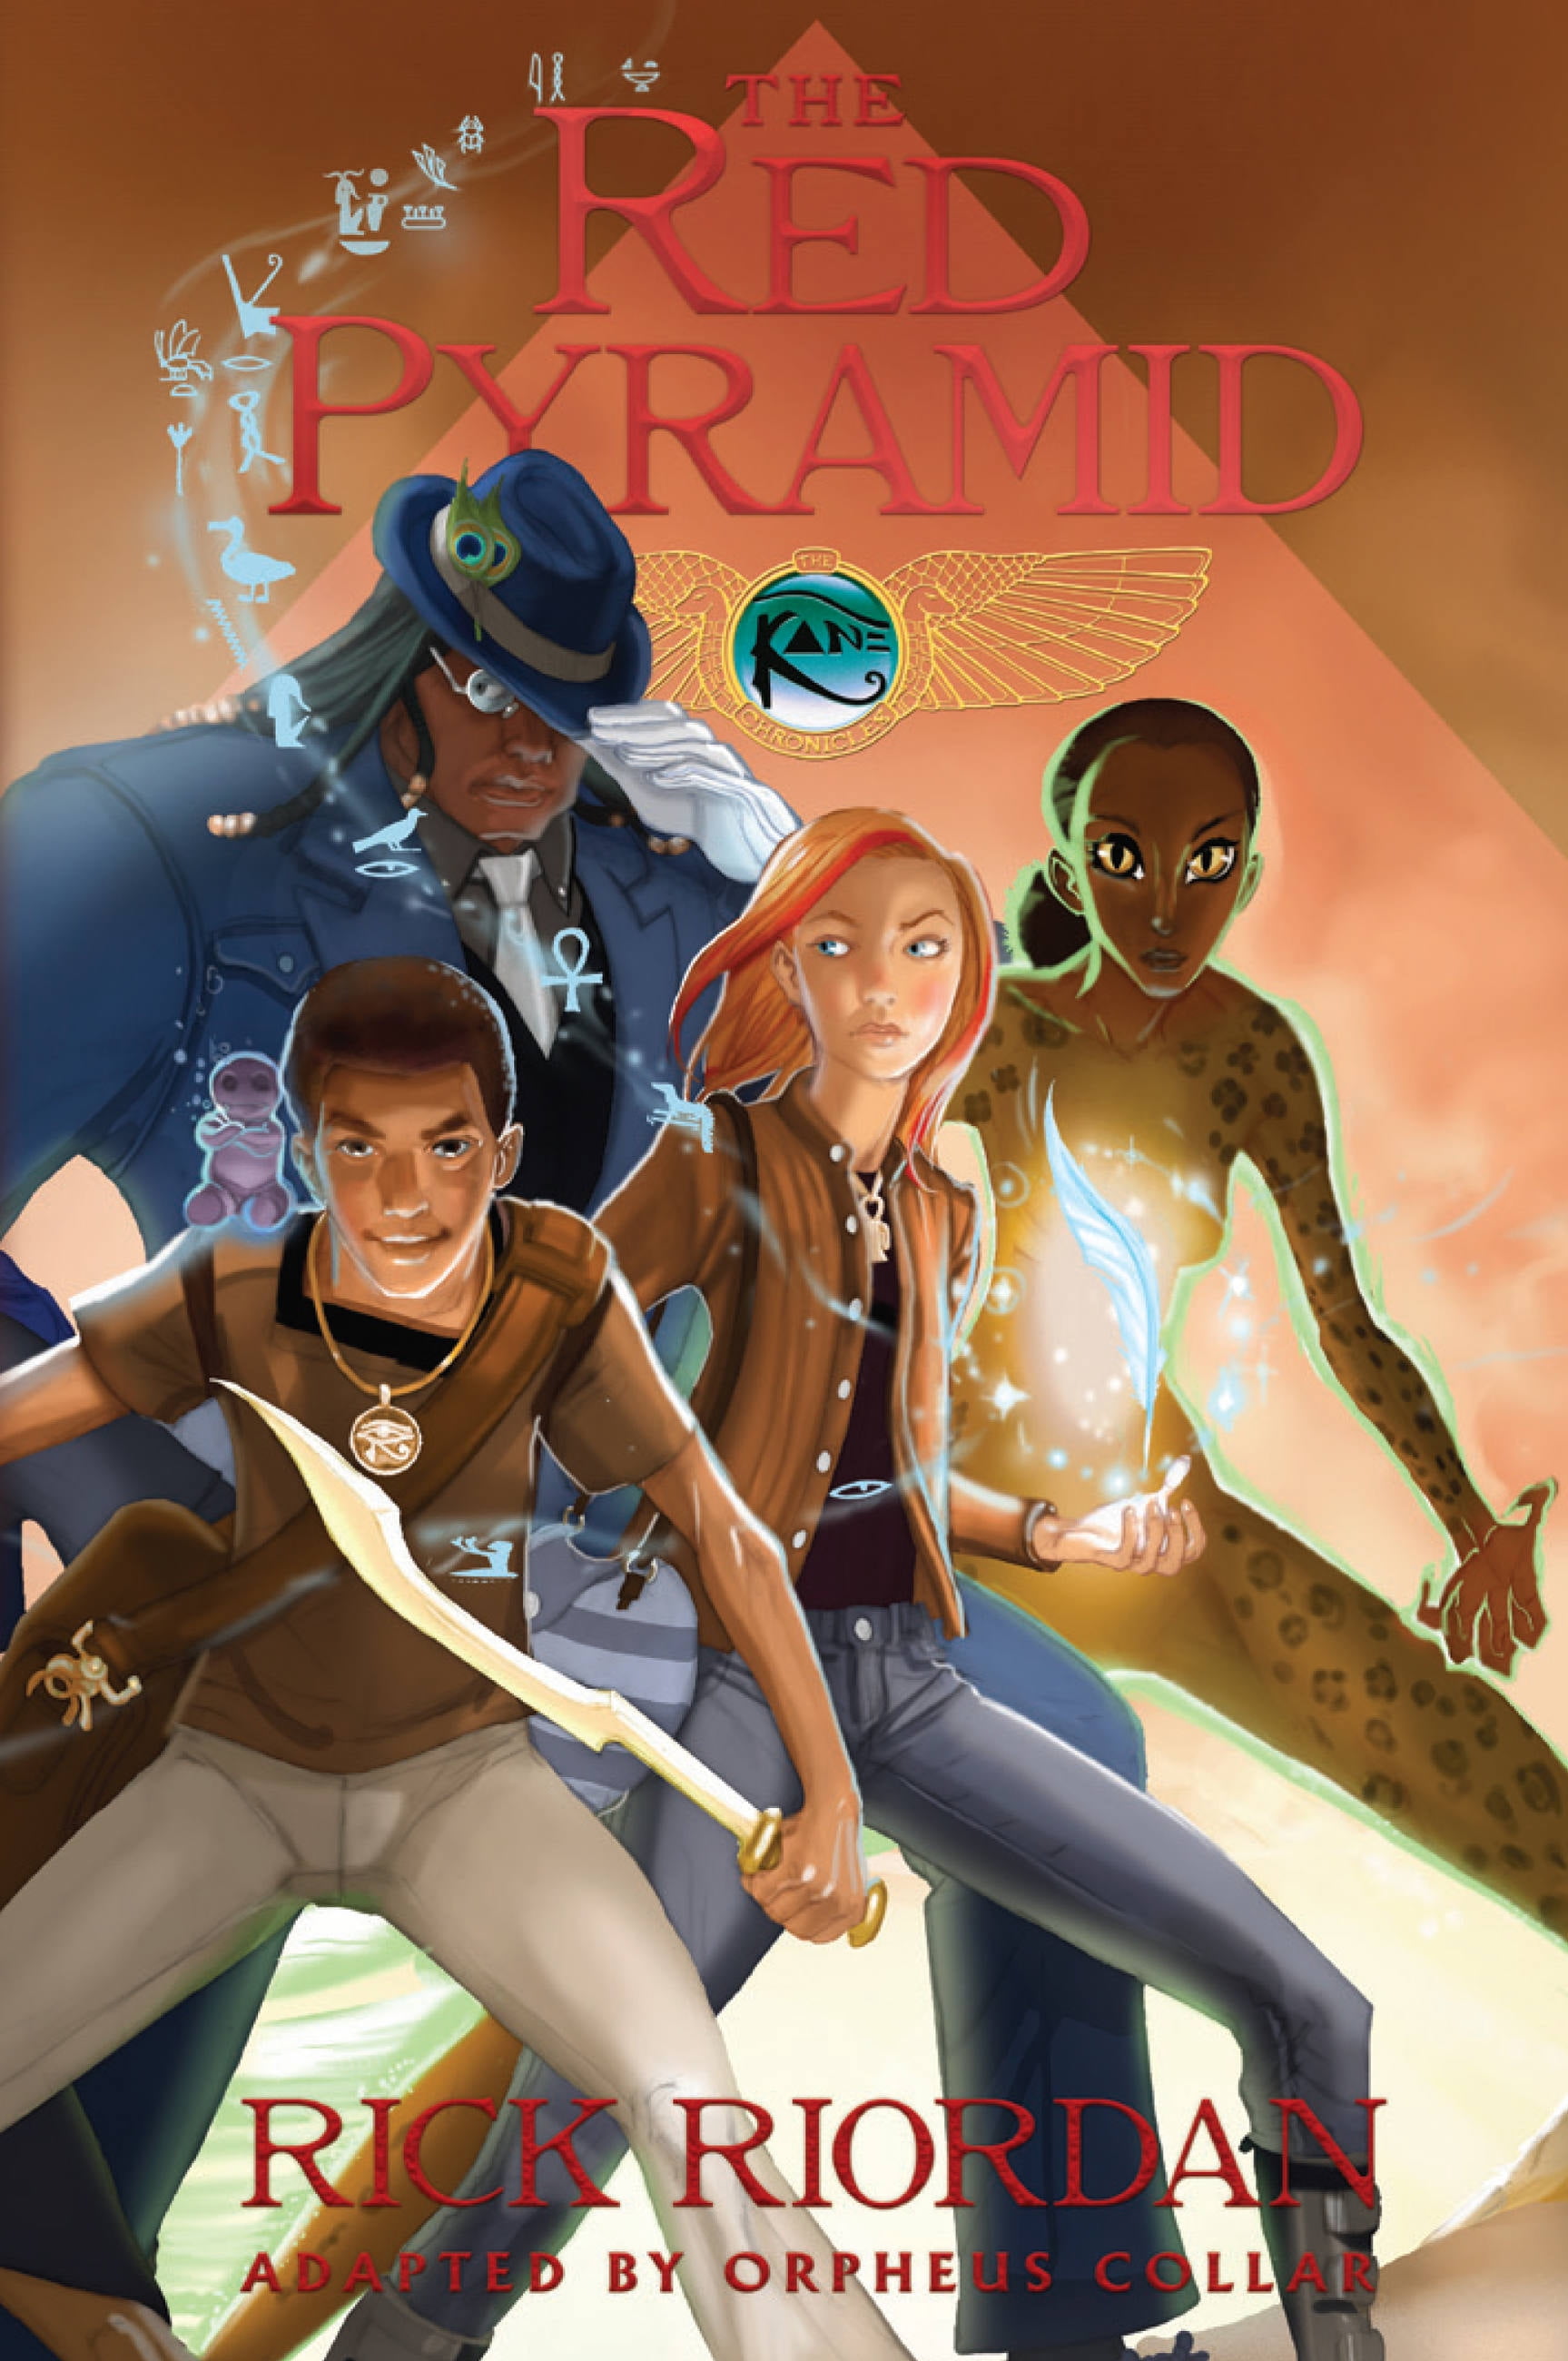 The Kane Chronicles, Book One The Red Pyramid: The Graphic Novel (Kane